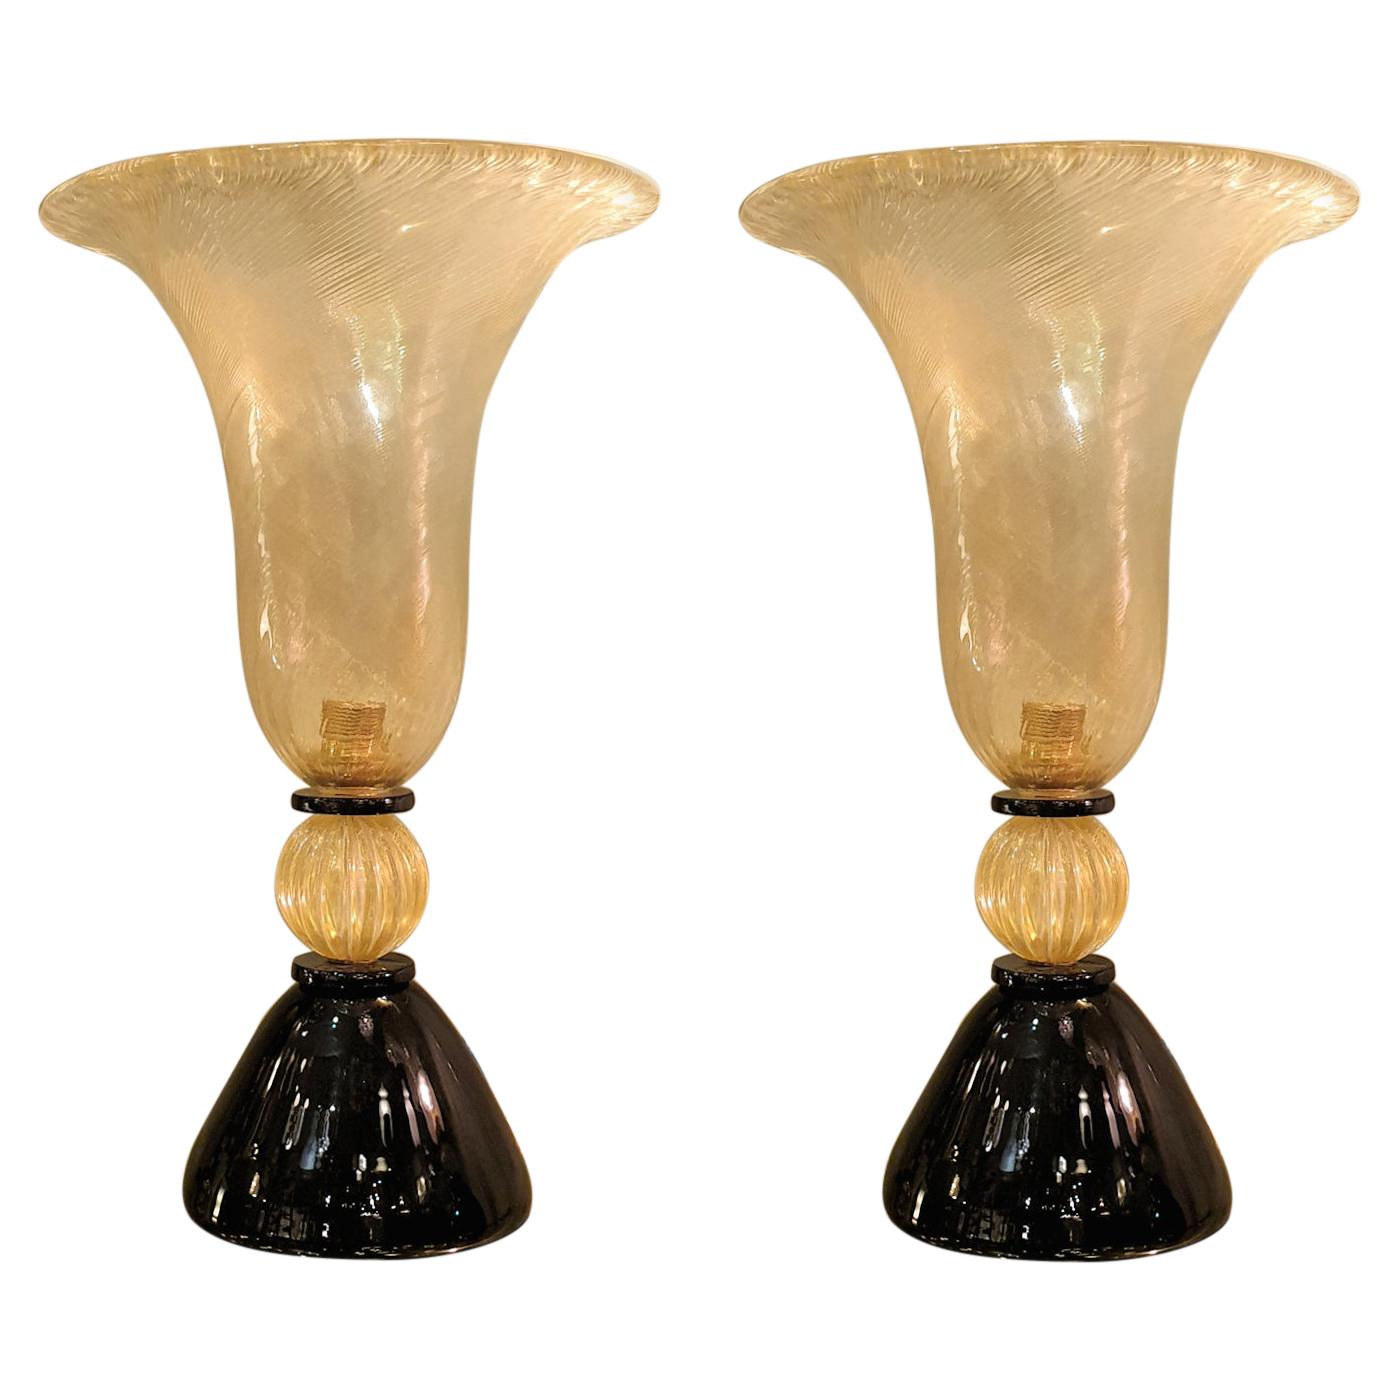 Large Pair Mid-Century Modern Gold Murano Glass Table Lamps, Venini Style, Italy